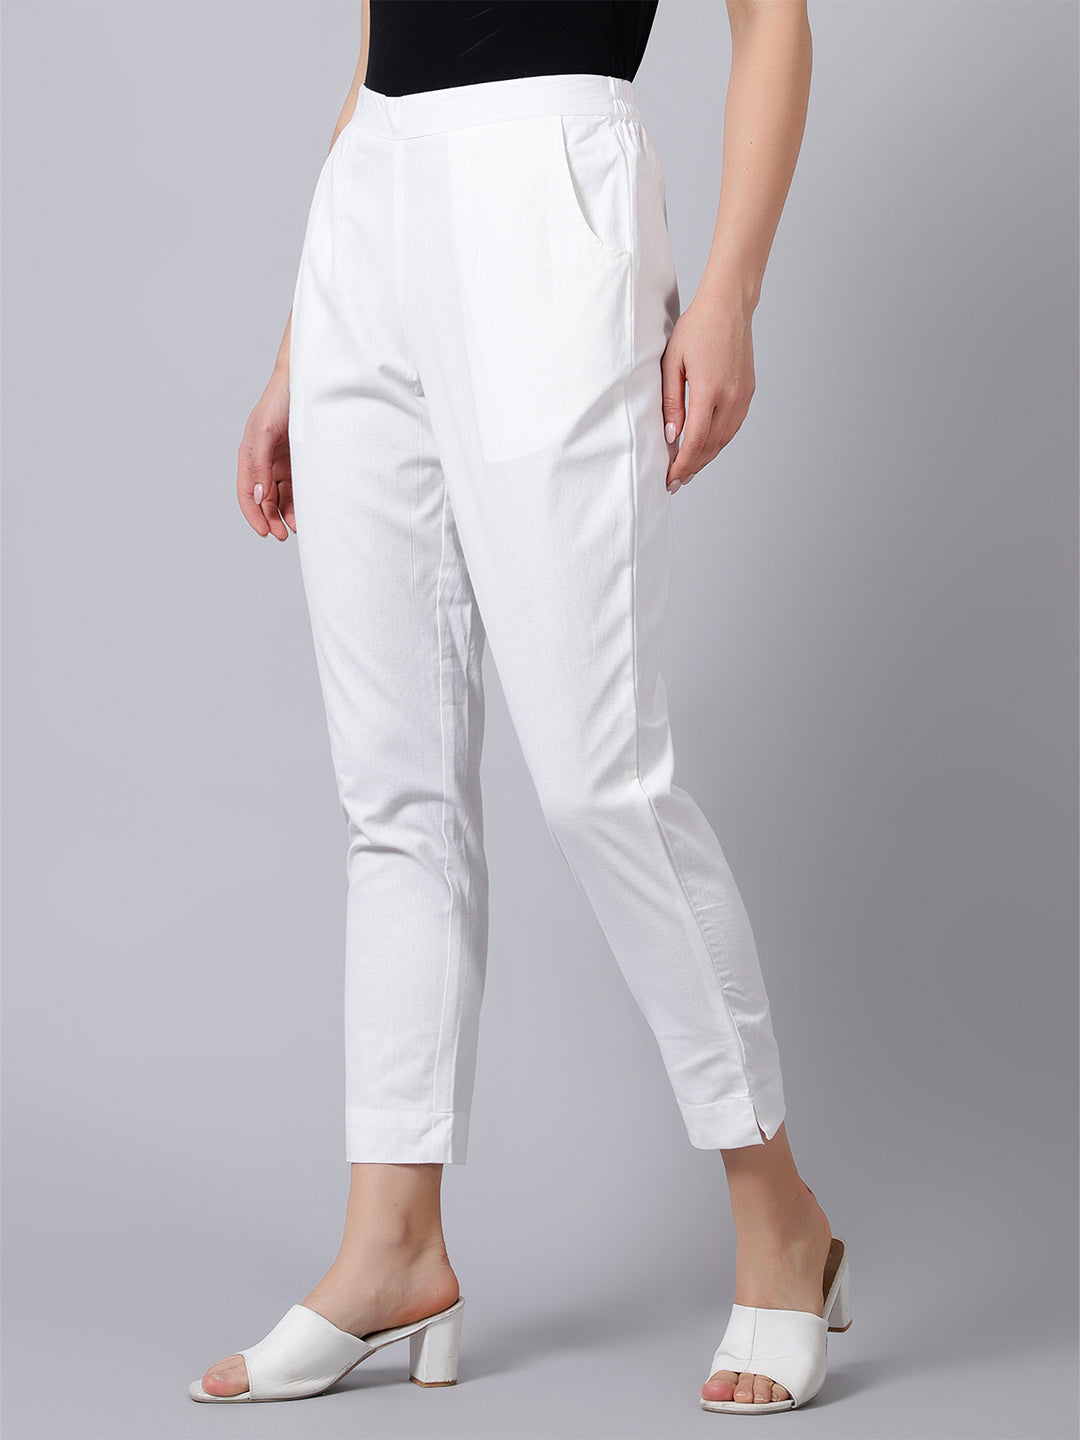 White Solid Pants